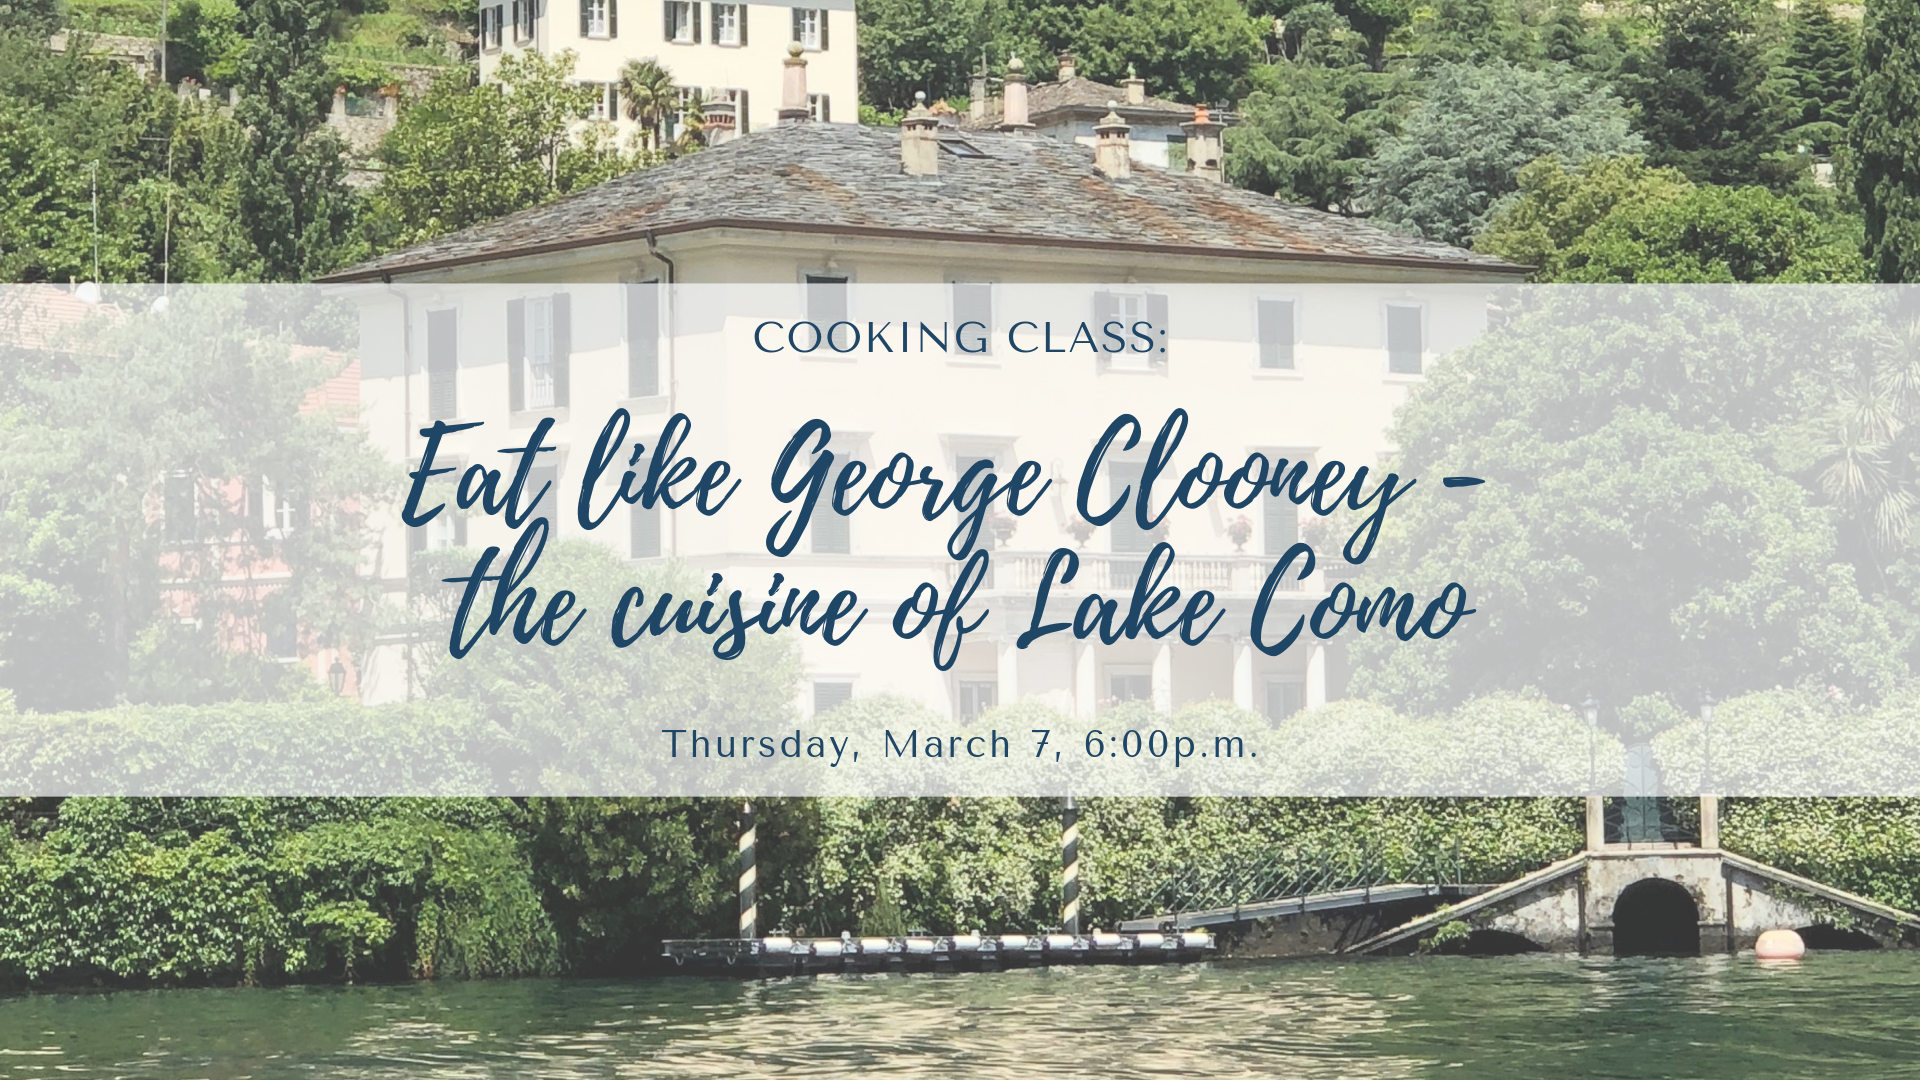 Cooking Class Eat Like George Clooney The Cuisine Of Lake Orsvpa